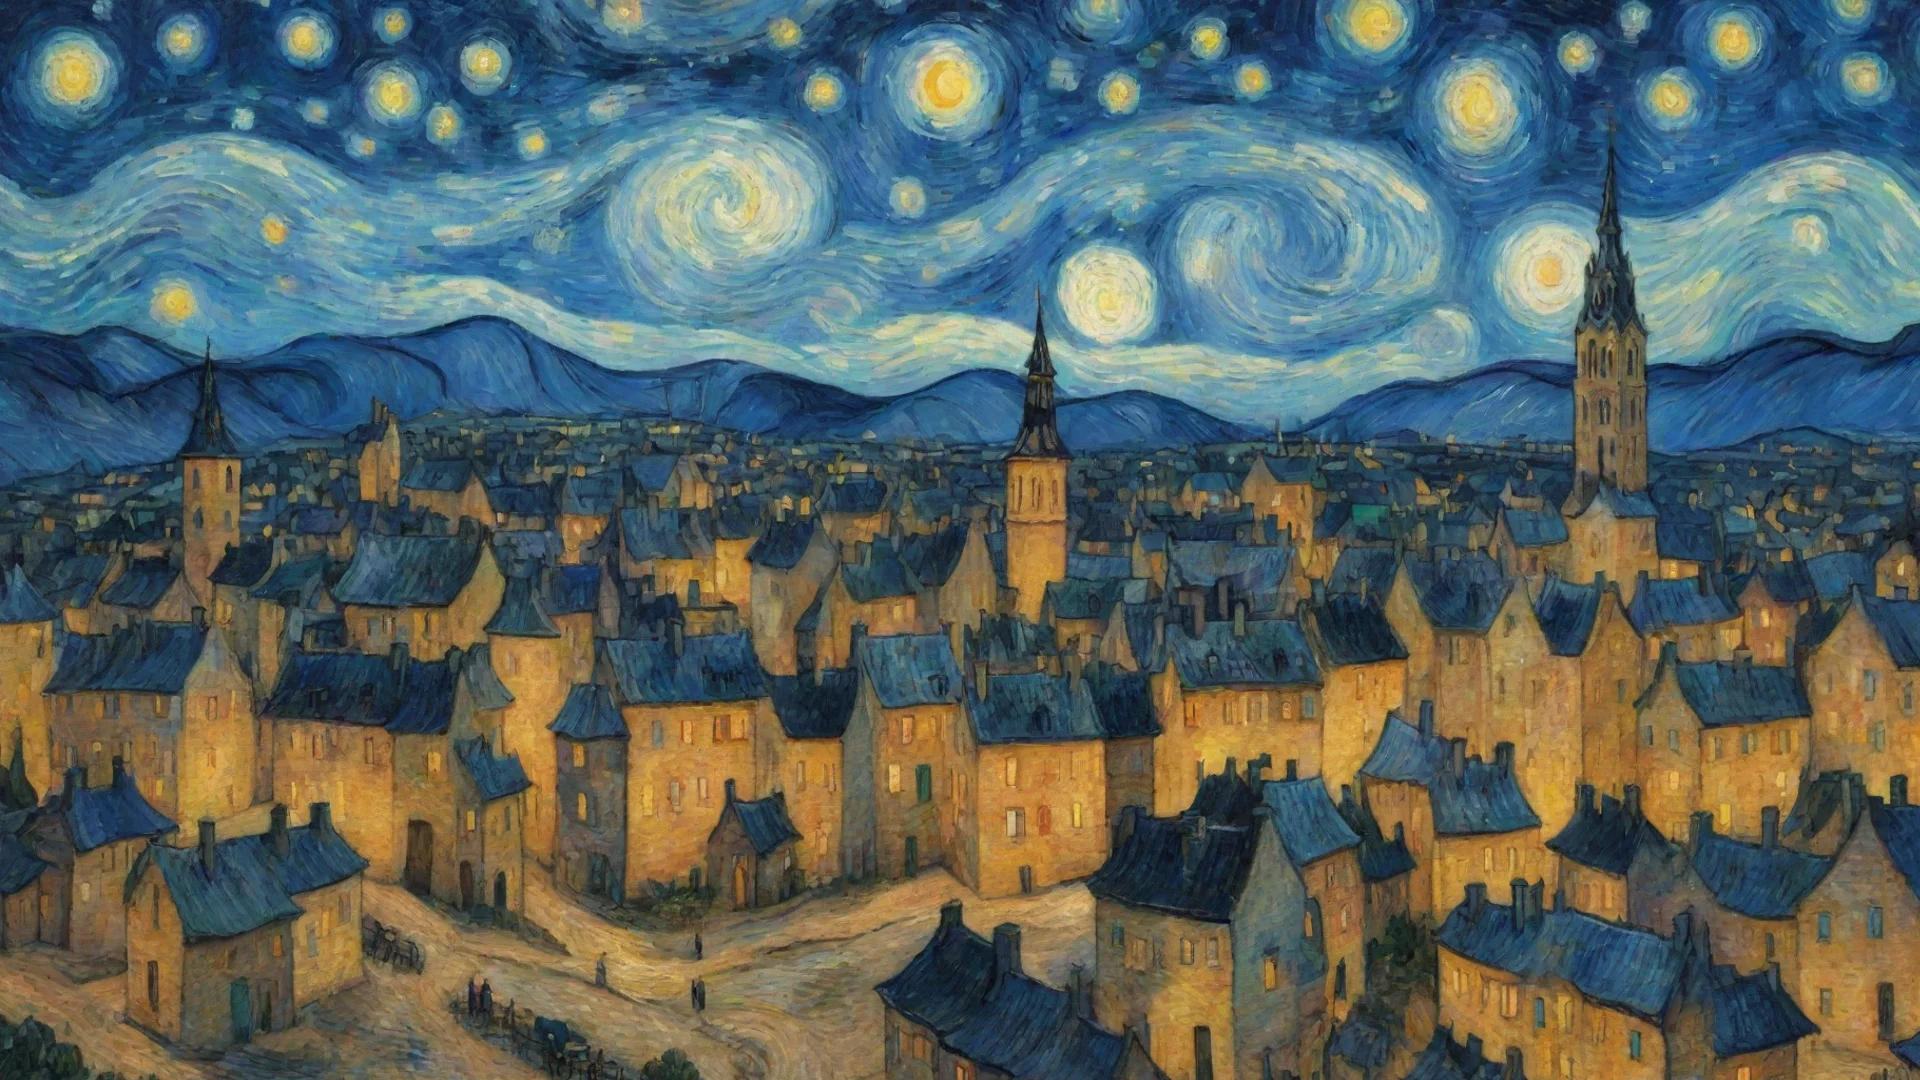 aitrending artistic van gogh village at night starry spiraling towers amazing hd aesthetic good looking fantastic 1 wide